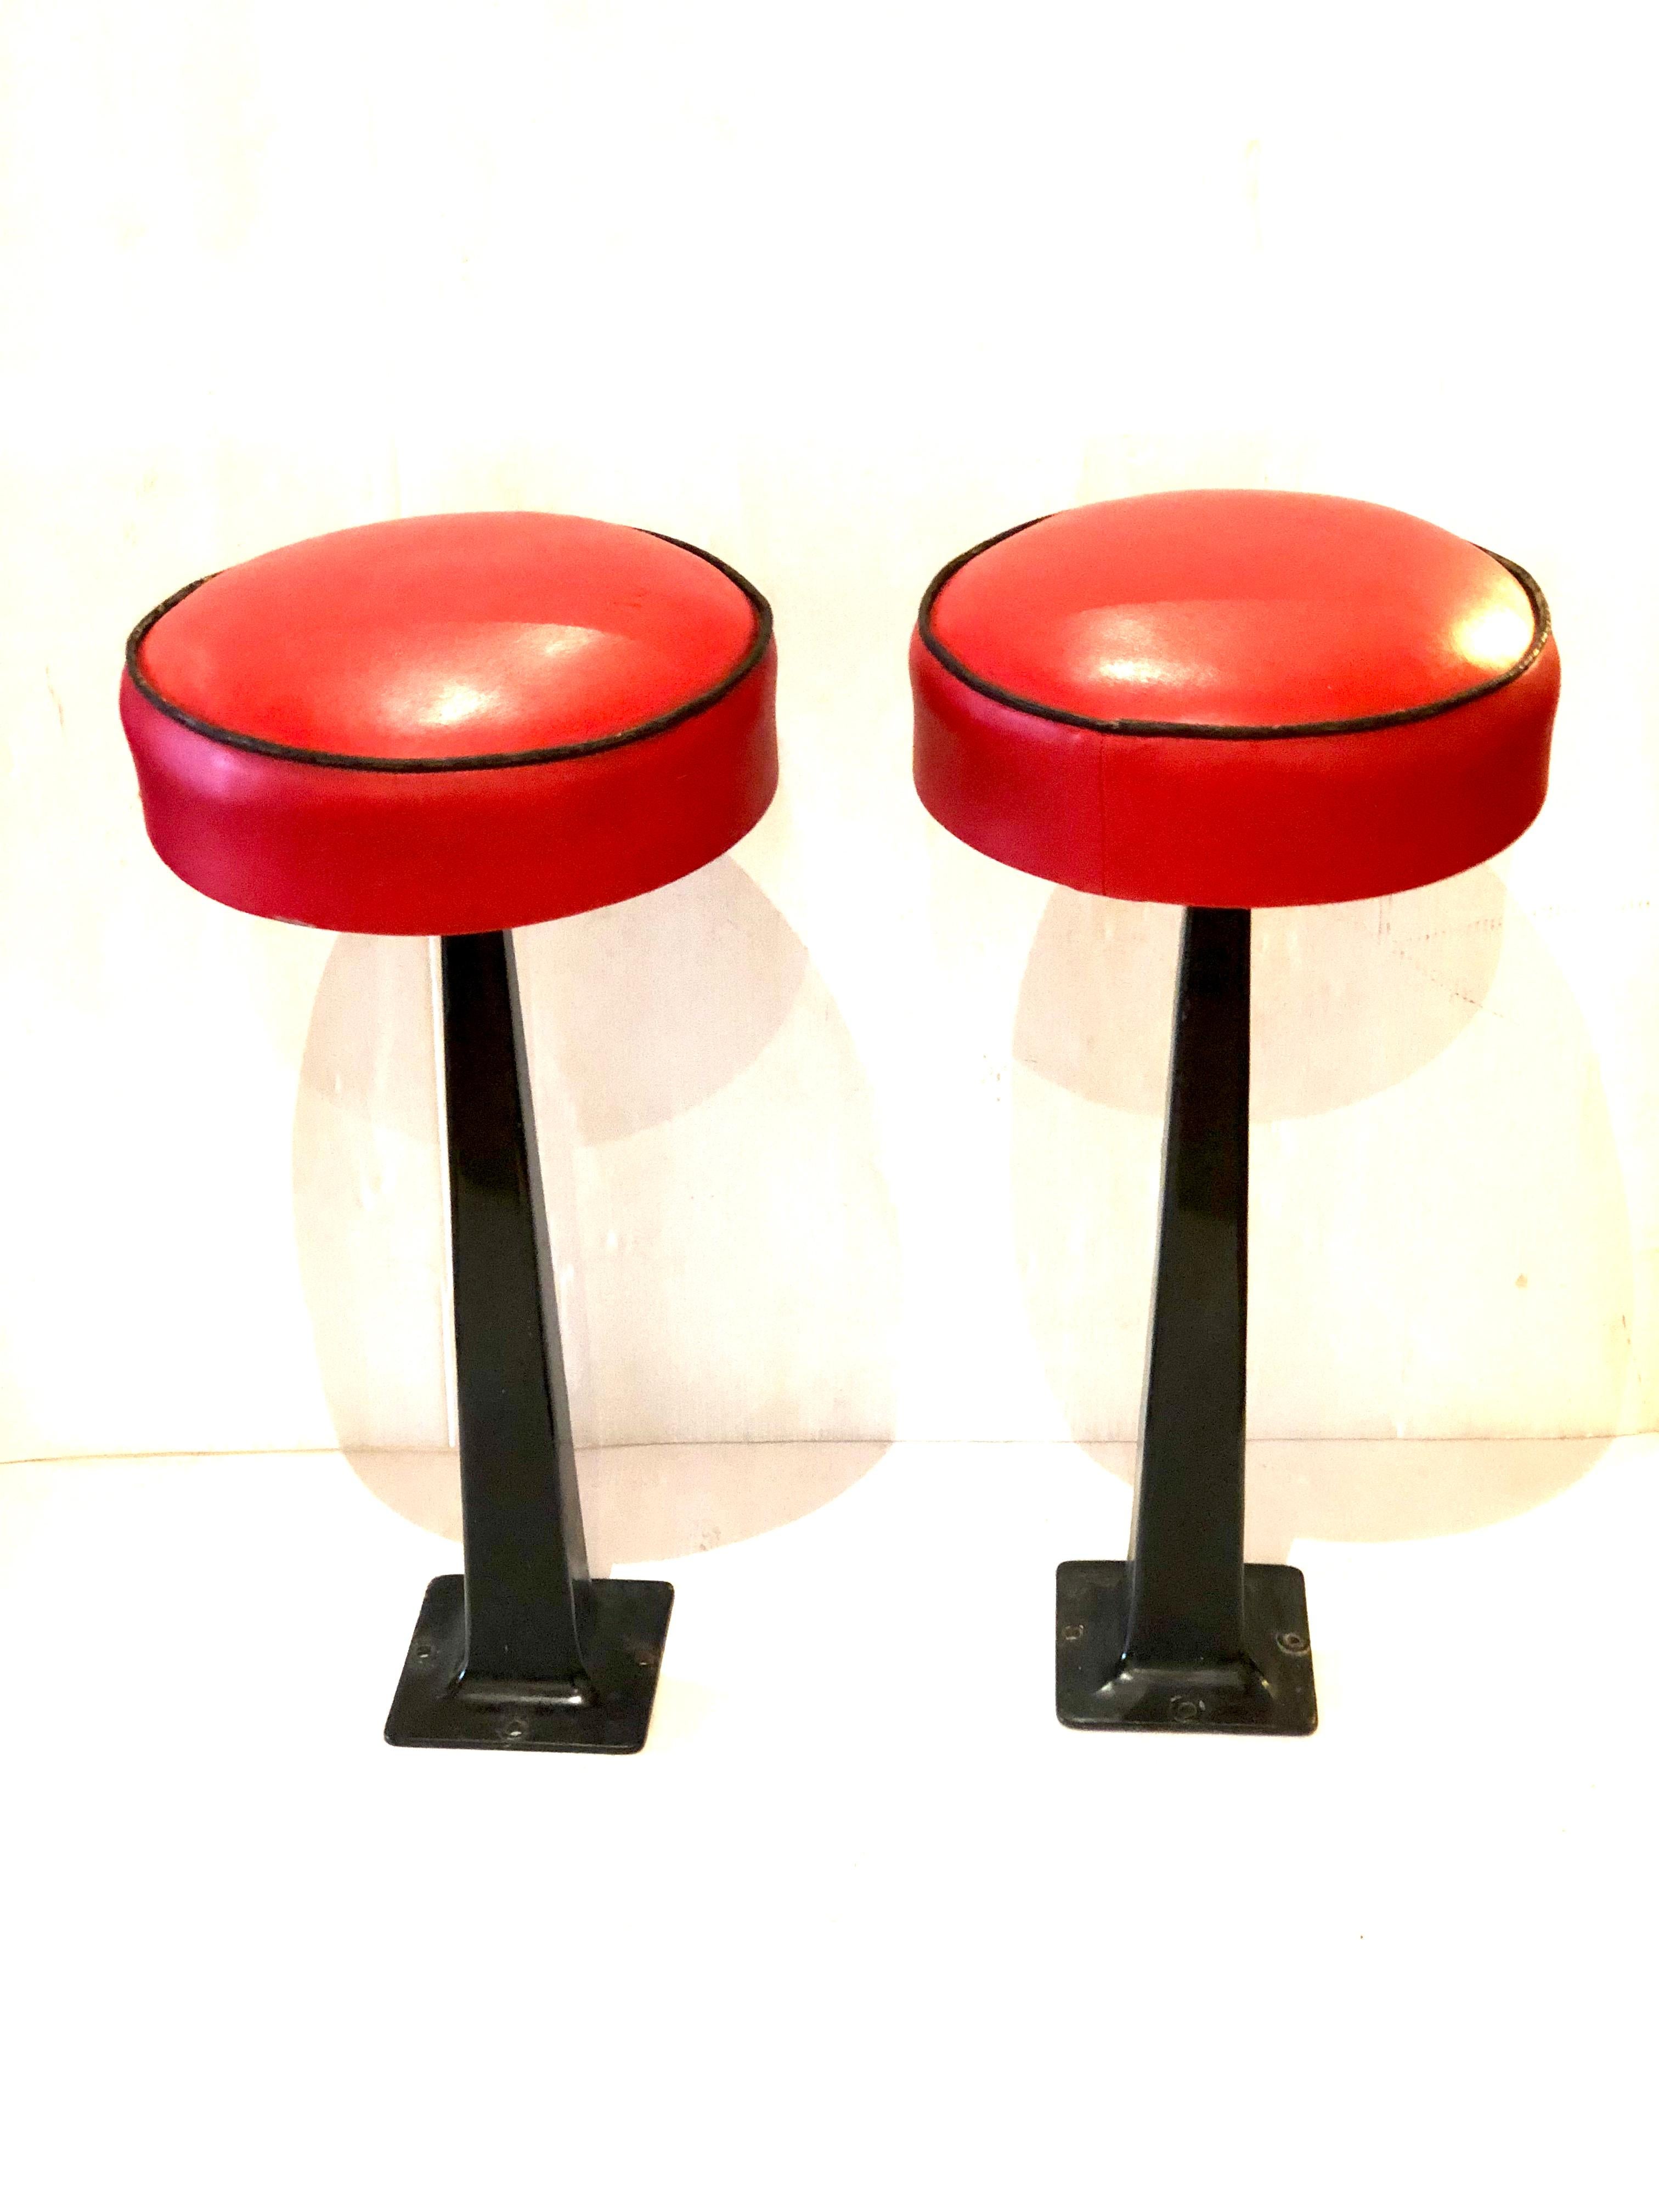 Pair of American Mid-Century Modern, 1950s Swivel Stools In Good Condition For Sale In San Diego, CA